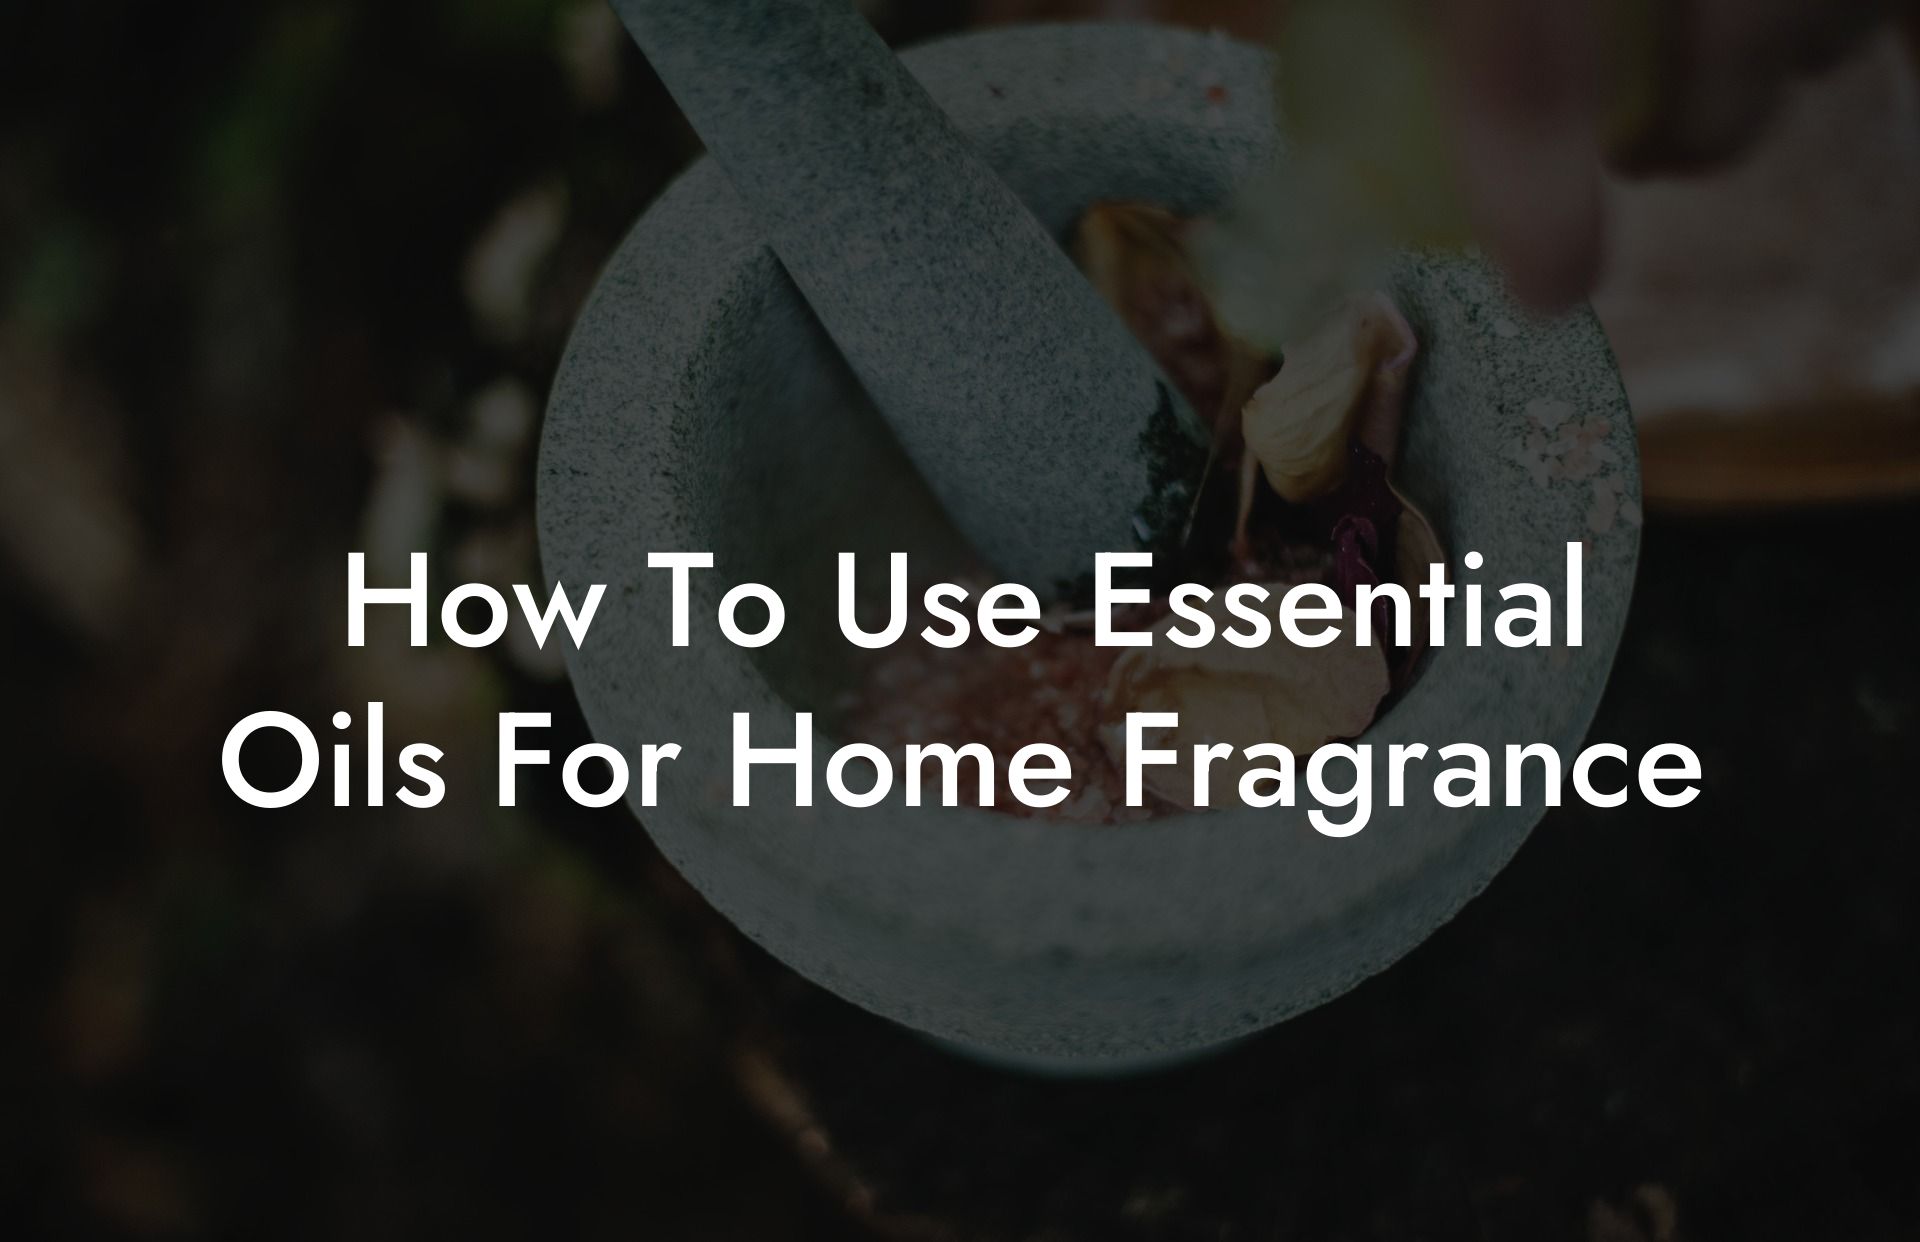 How To Use Essential Oils For Home Fragrance